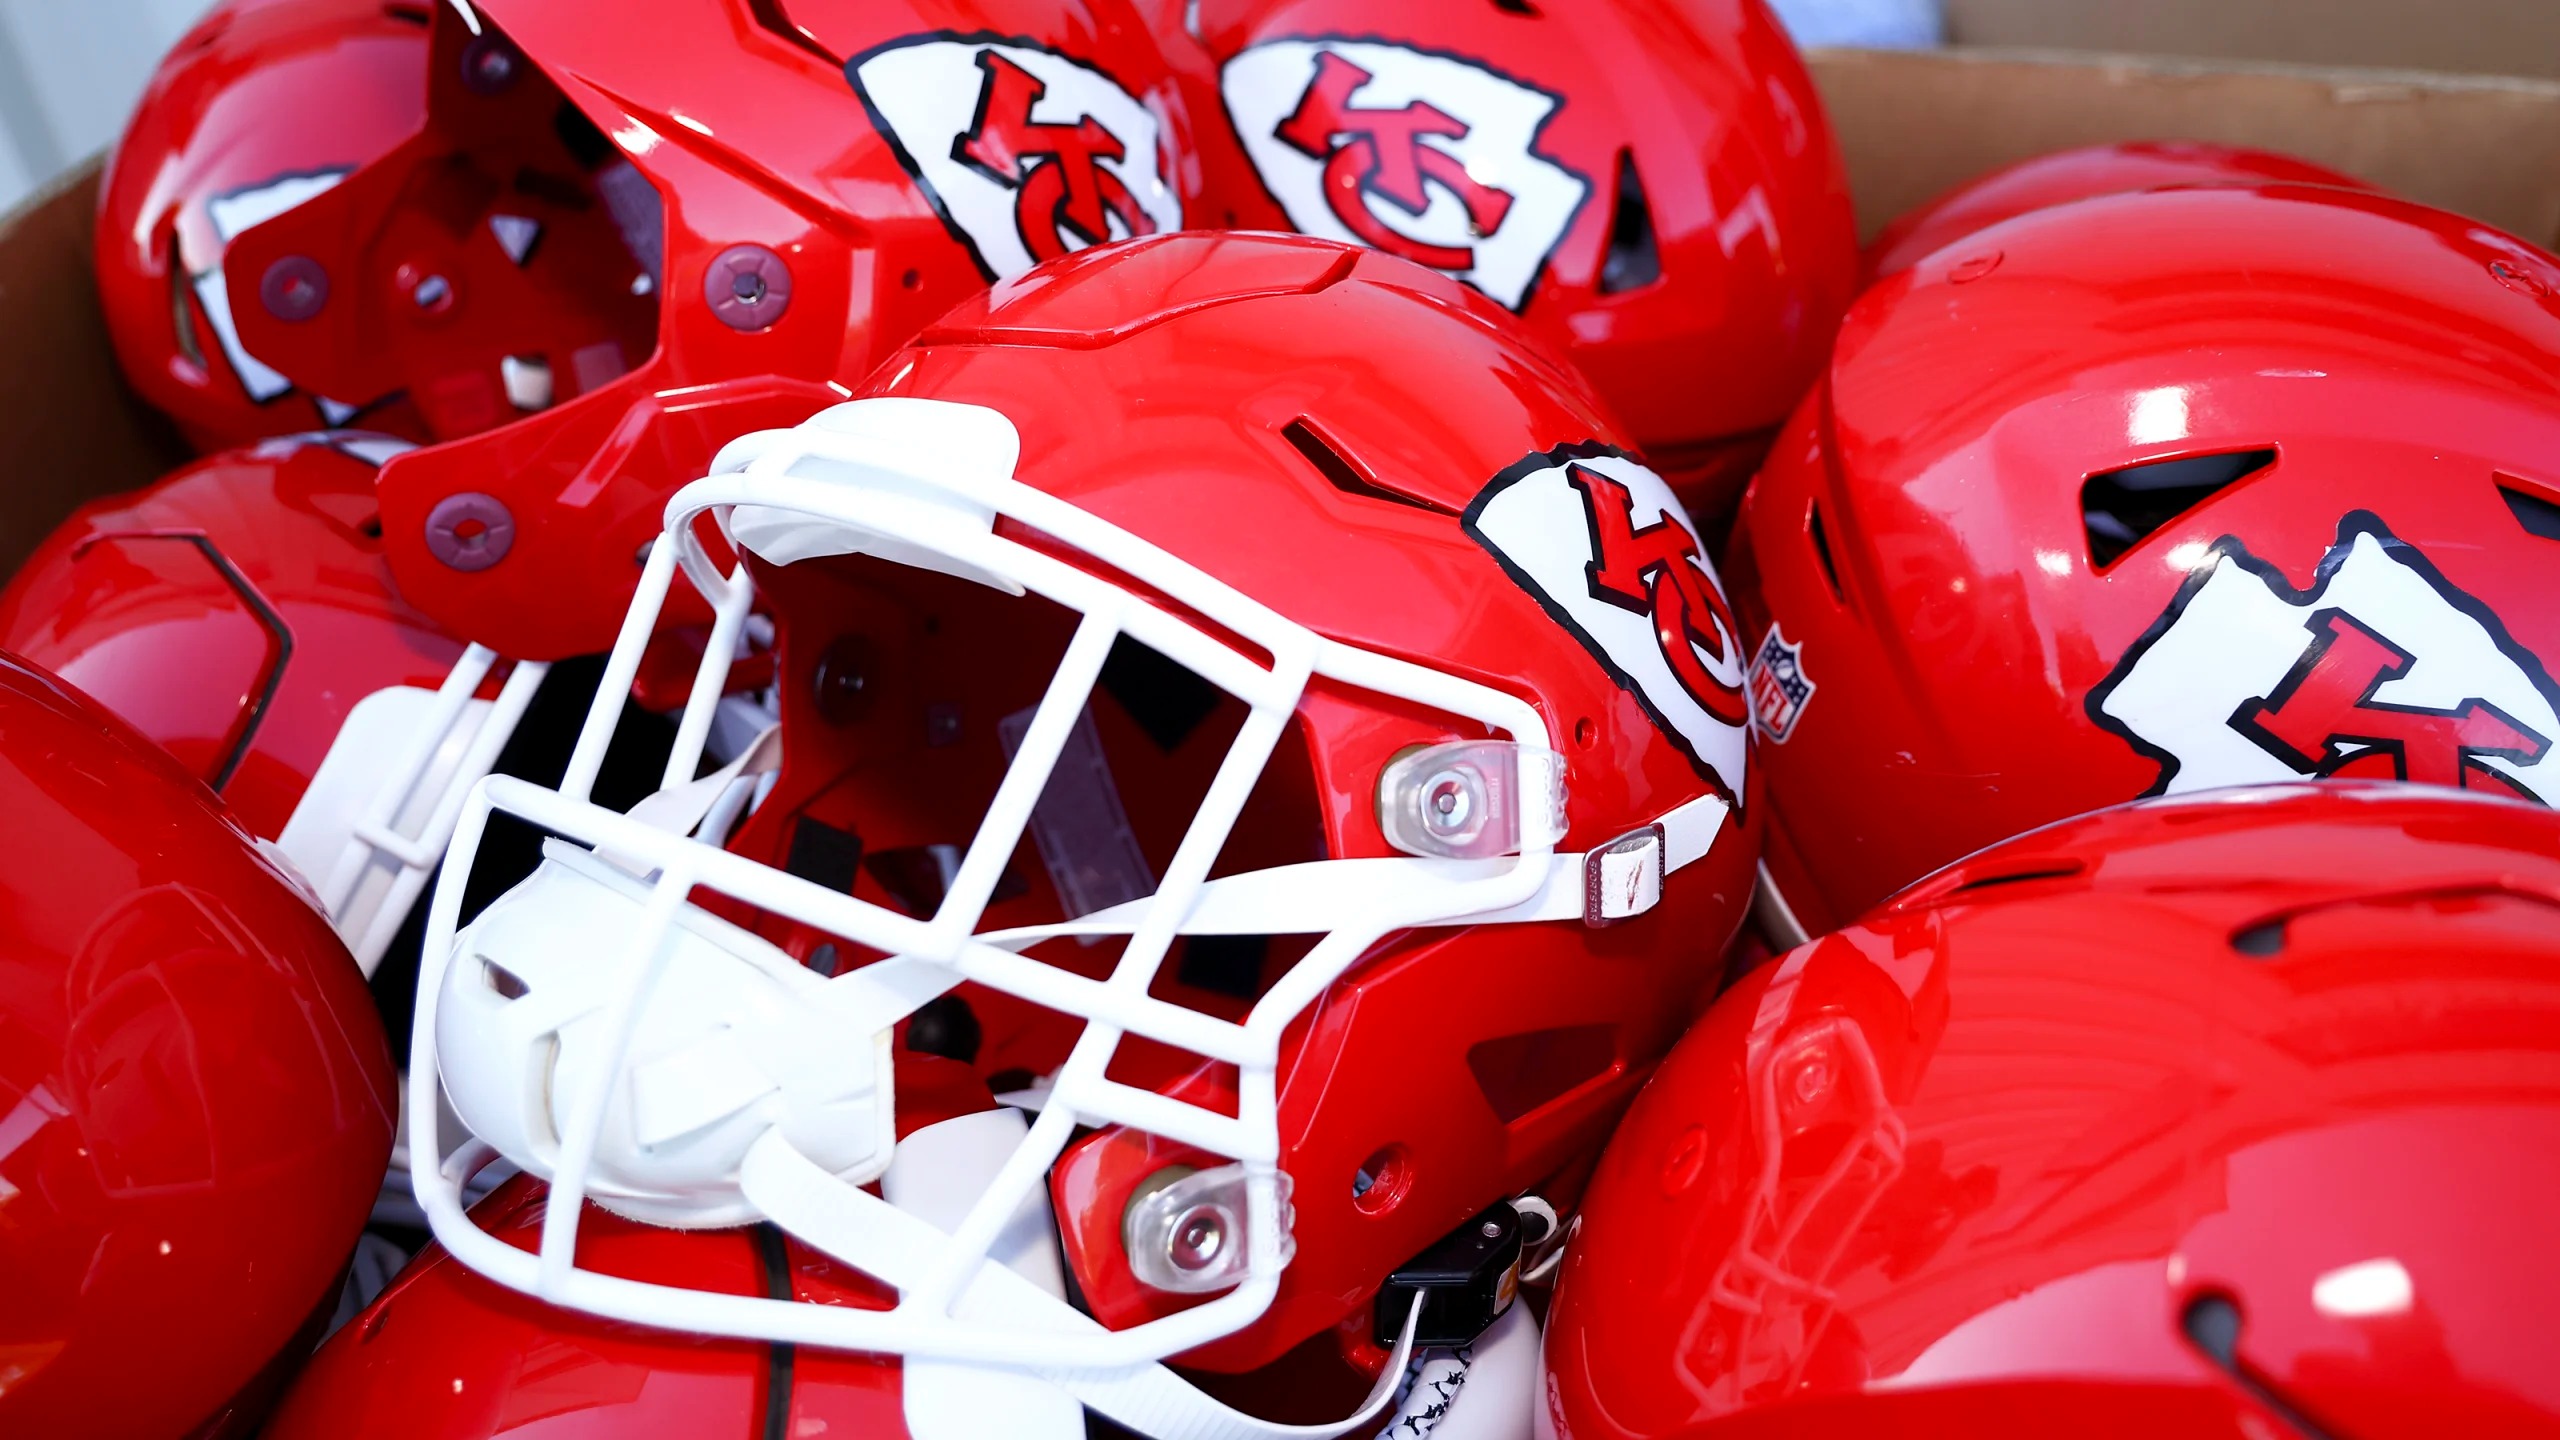 Kansas City Chiefs Playoff Scenarios and Chances: When Can They